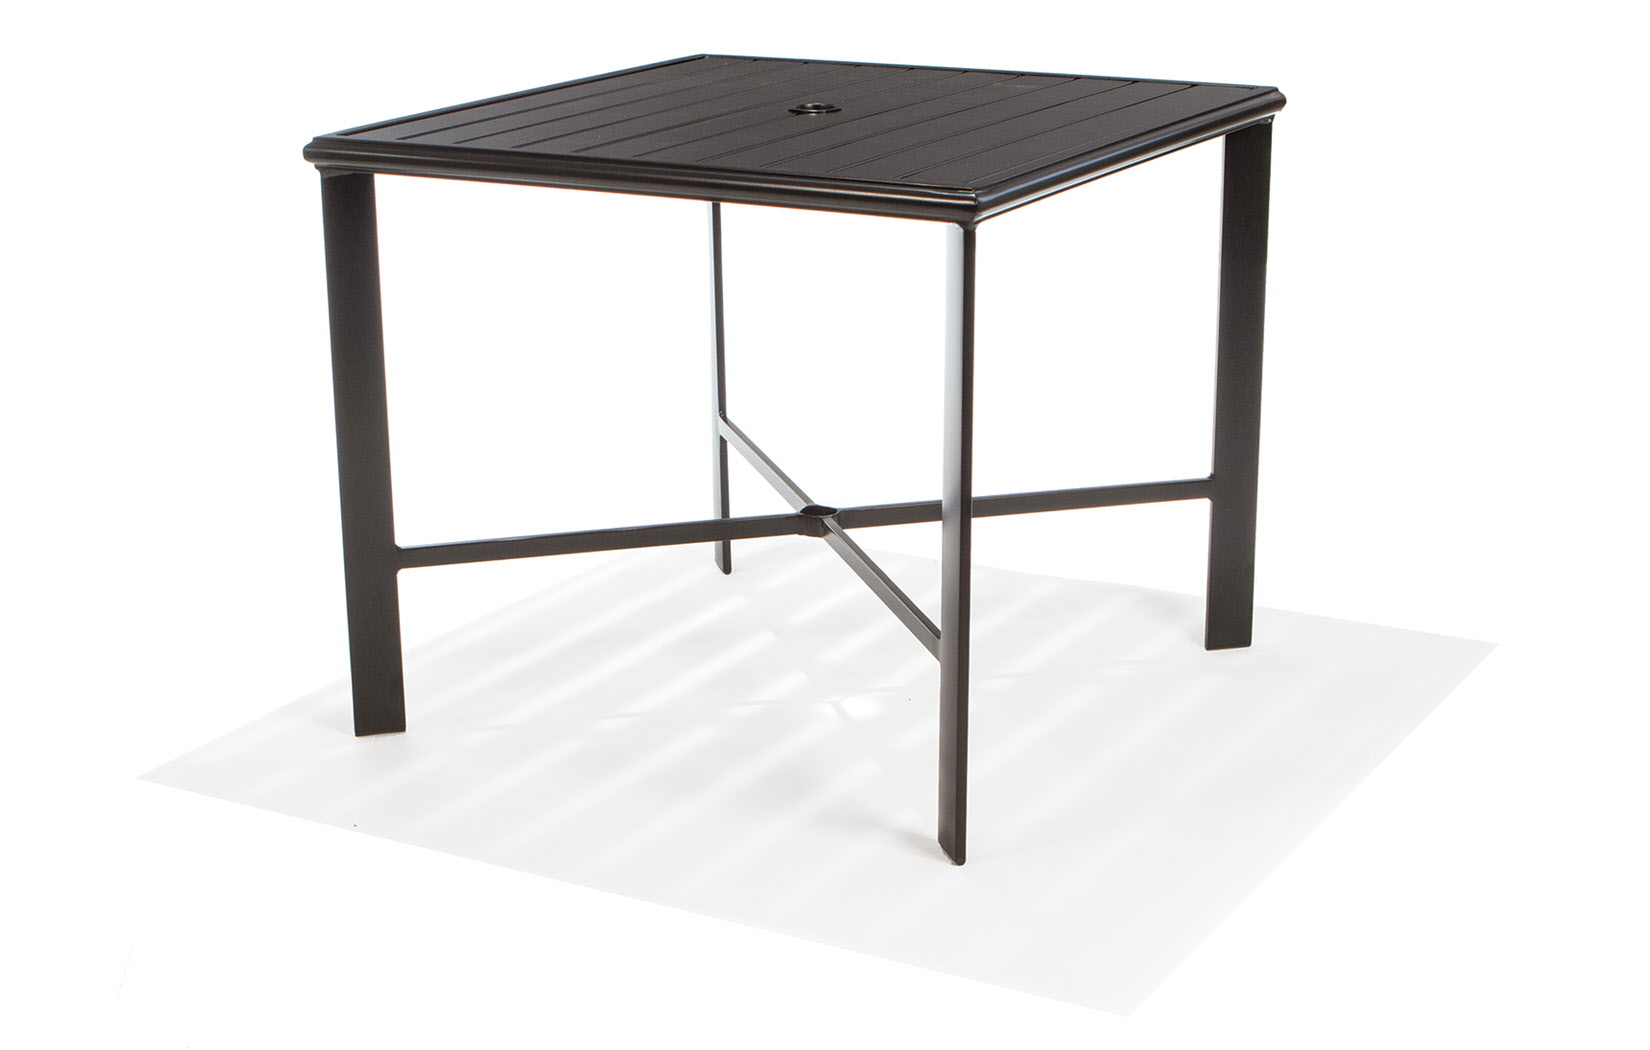 Fully Welded 34 Inch Square Aluminum Slat Dining Table